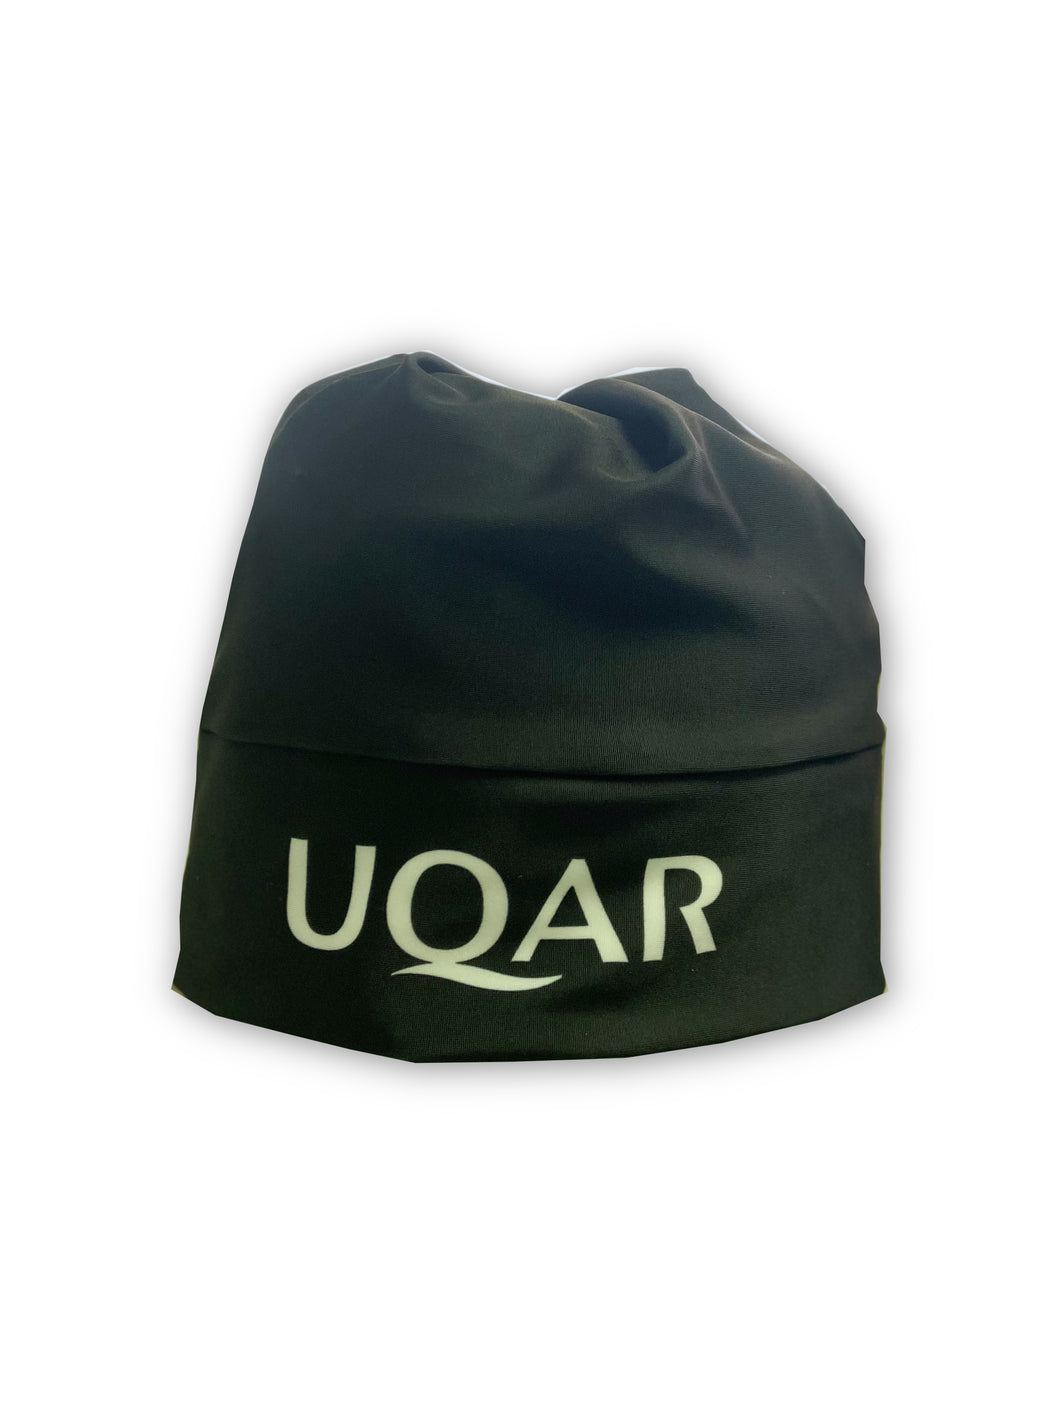 Tuque Sportive UQAR HOMME